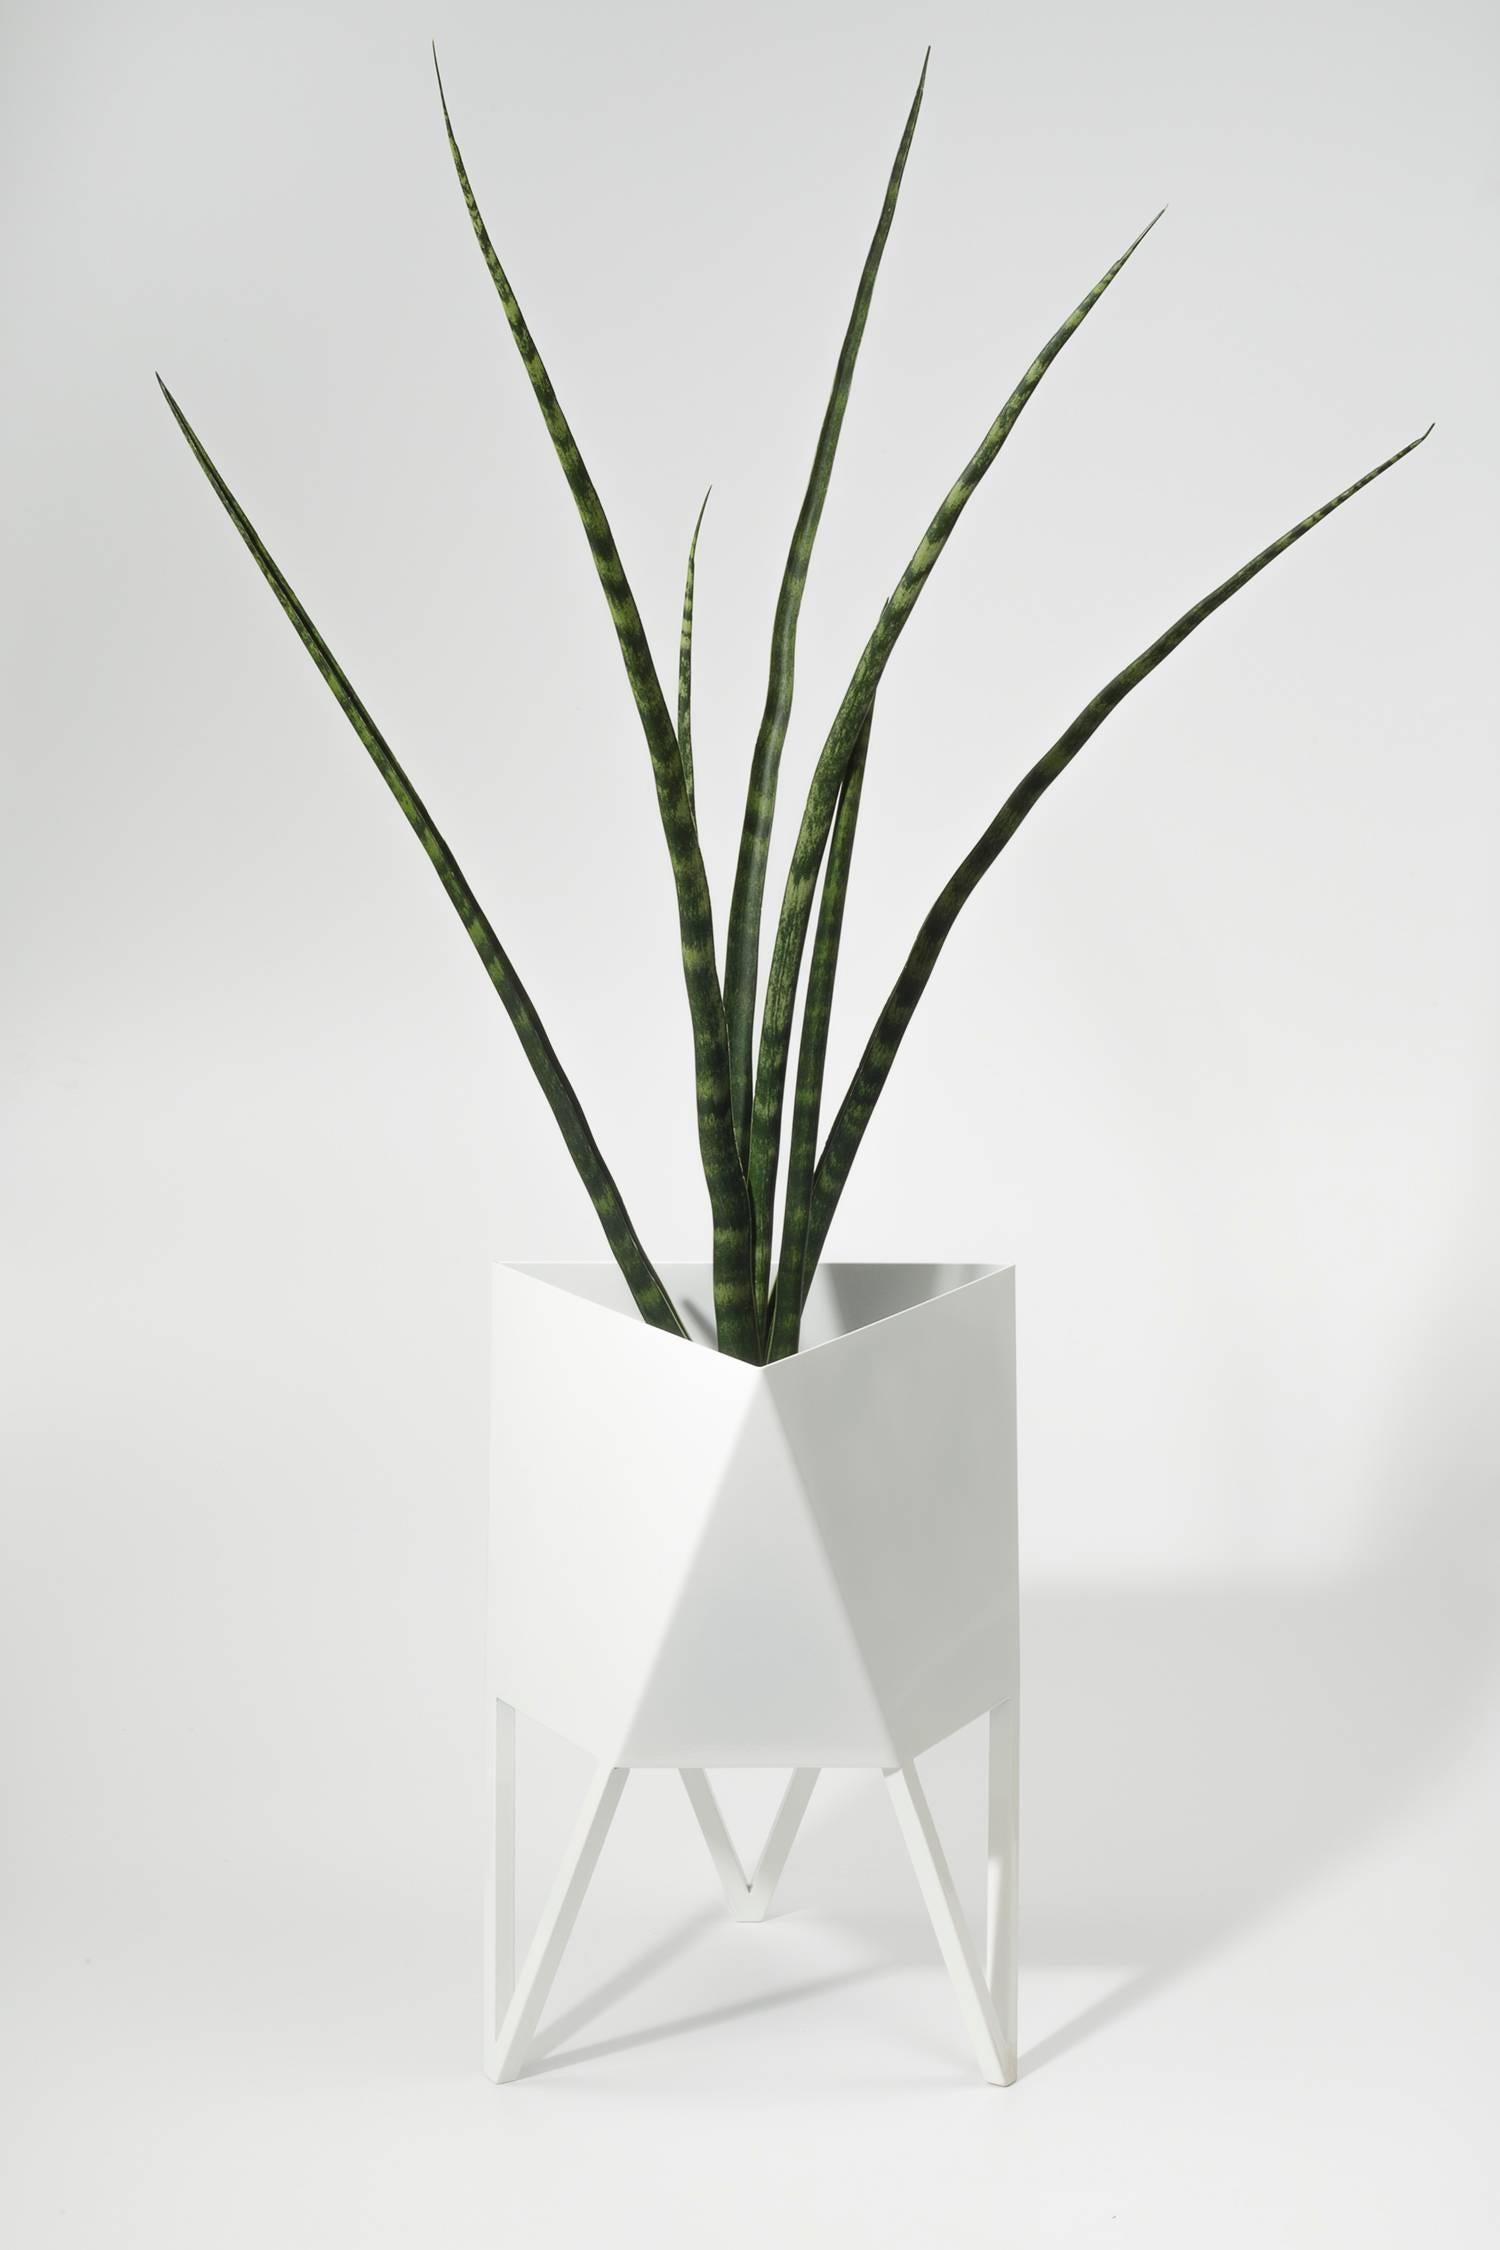 Contemporary Deca Planter in Daffodil Yellow Steel, Mini, by Force/Collide